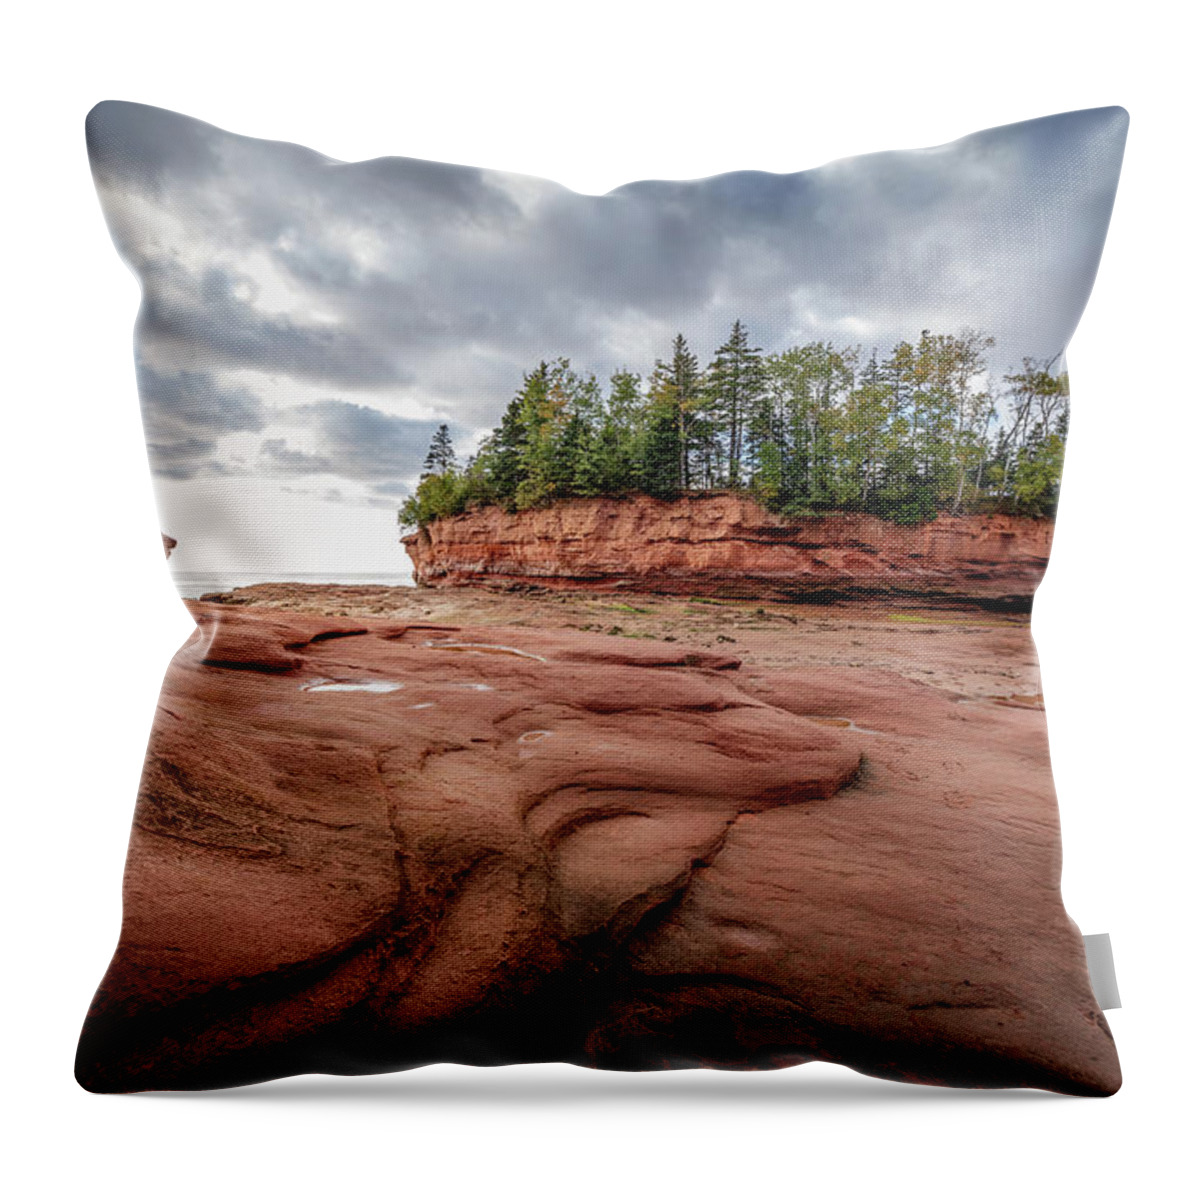 Appalachian Physiographic Region Throw Pillow featuring the photograph The Burntcoat Formations by Manpreet Sokhi